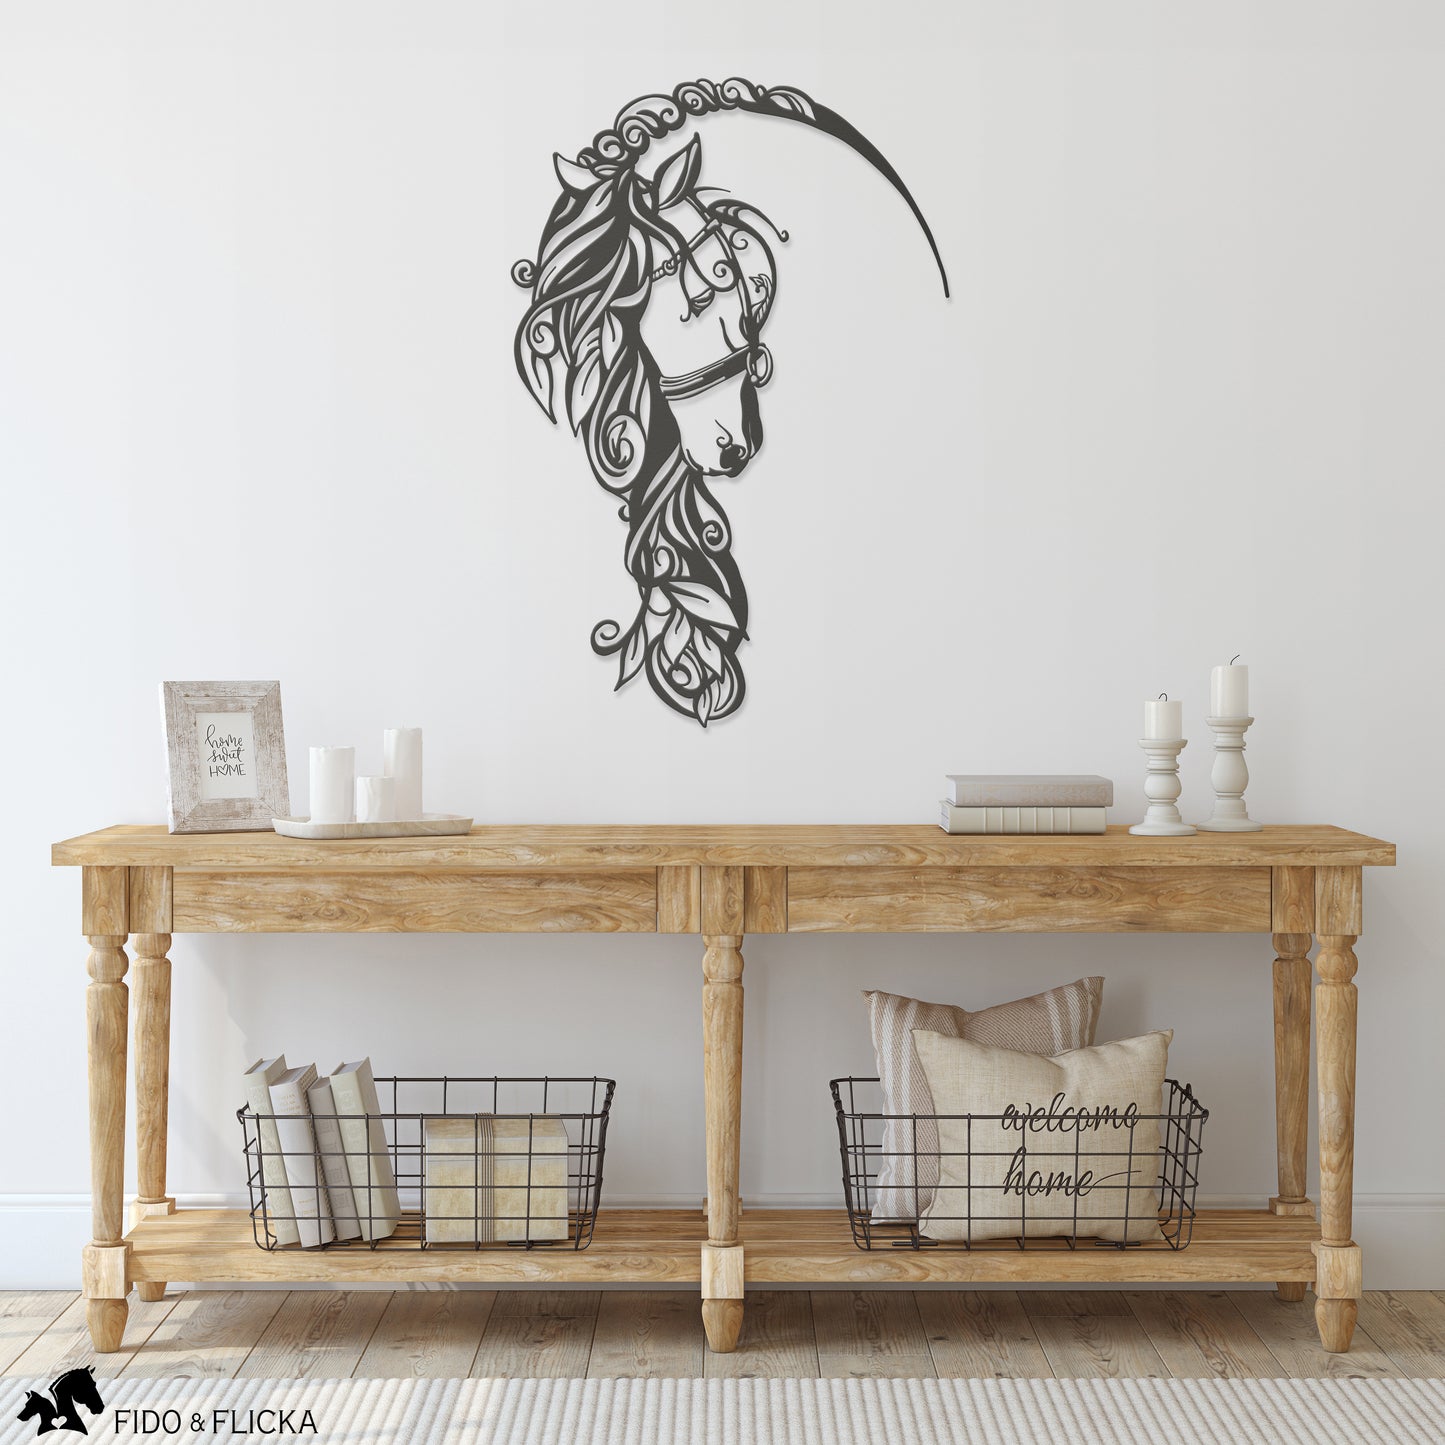 Horse with flowing mane metal wall art decor in entryway